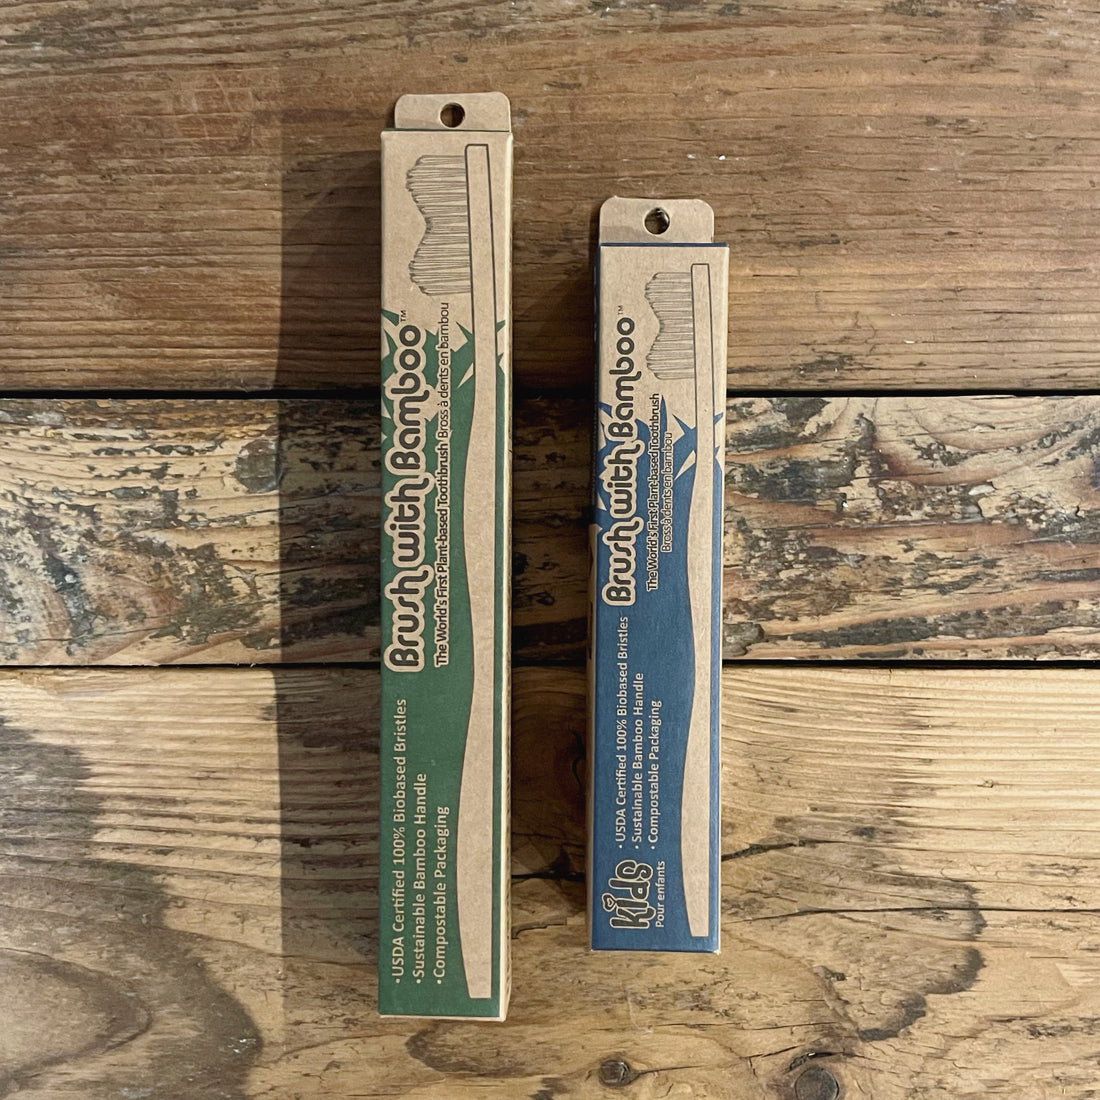 Bamboo Toothbrush - 100% Plant Based